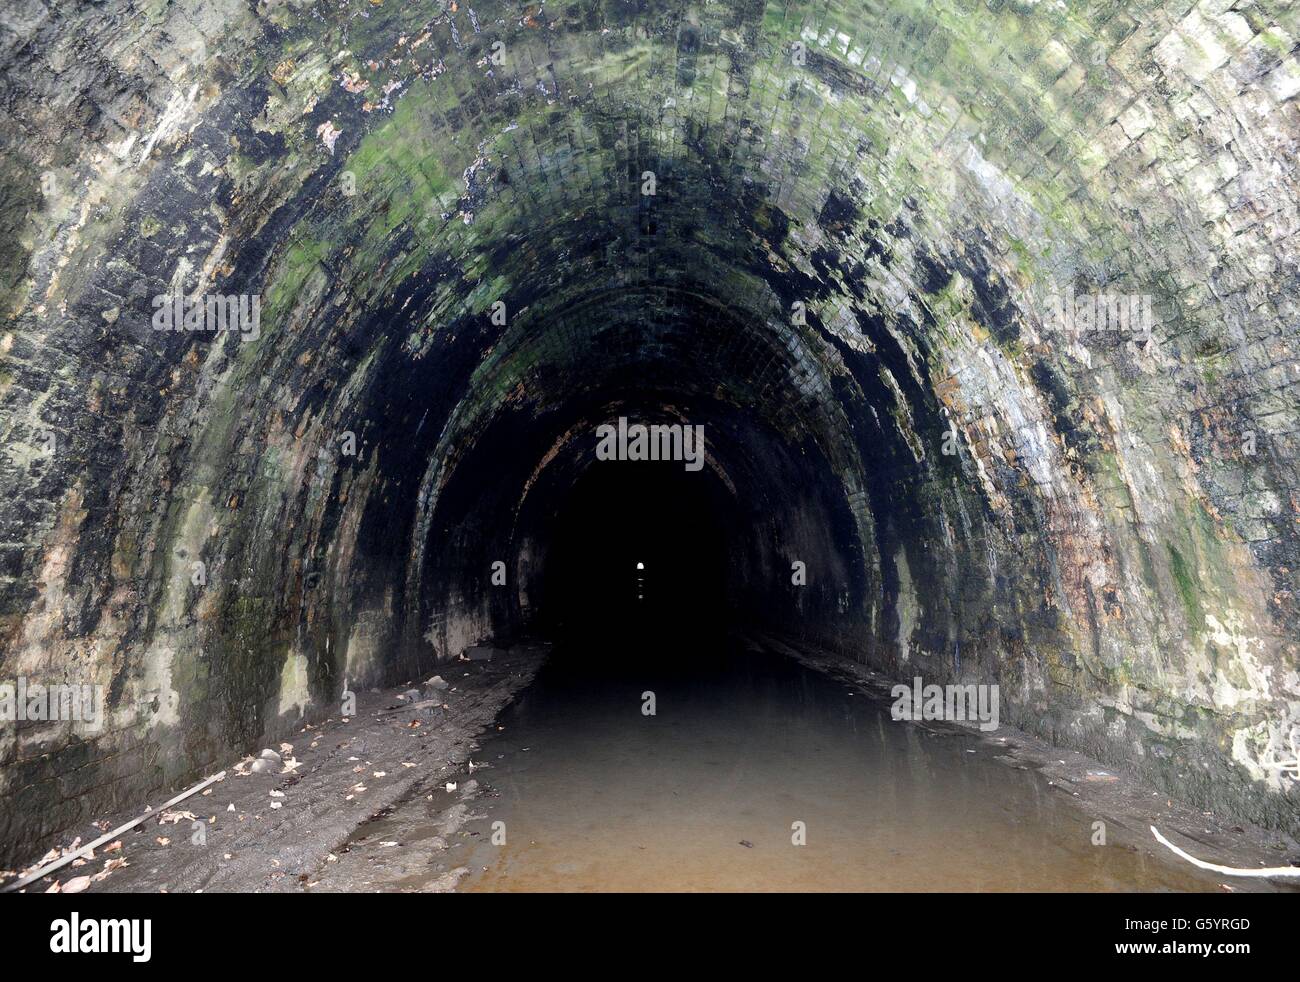 A general view showing the disused Prospect Tunnel near Harrogate which was formerly part of the Church Fenton to Harrogate line, one of the first to close under the Beeching axe. Stock Photo